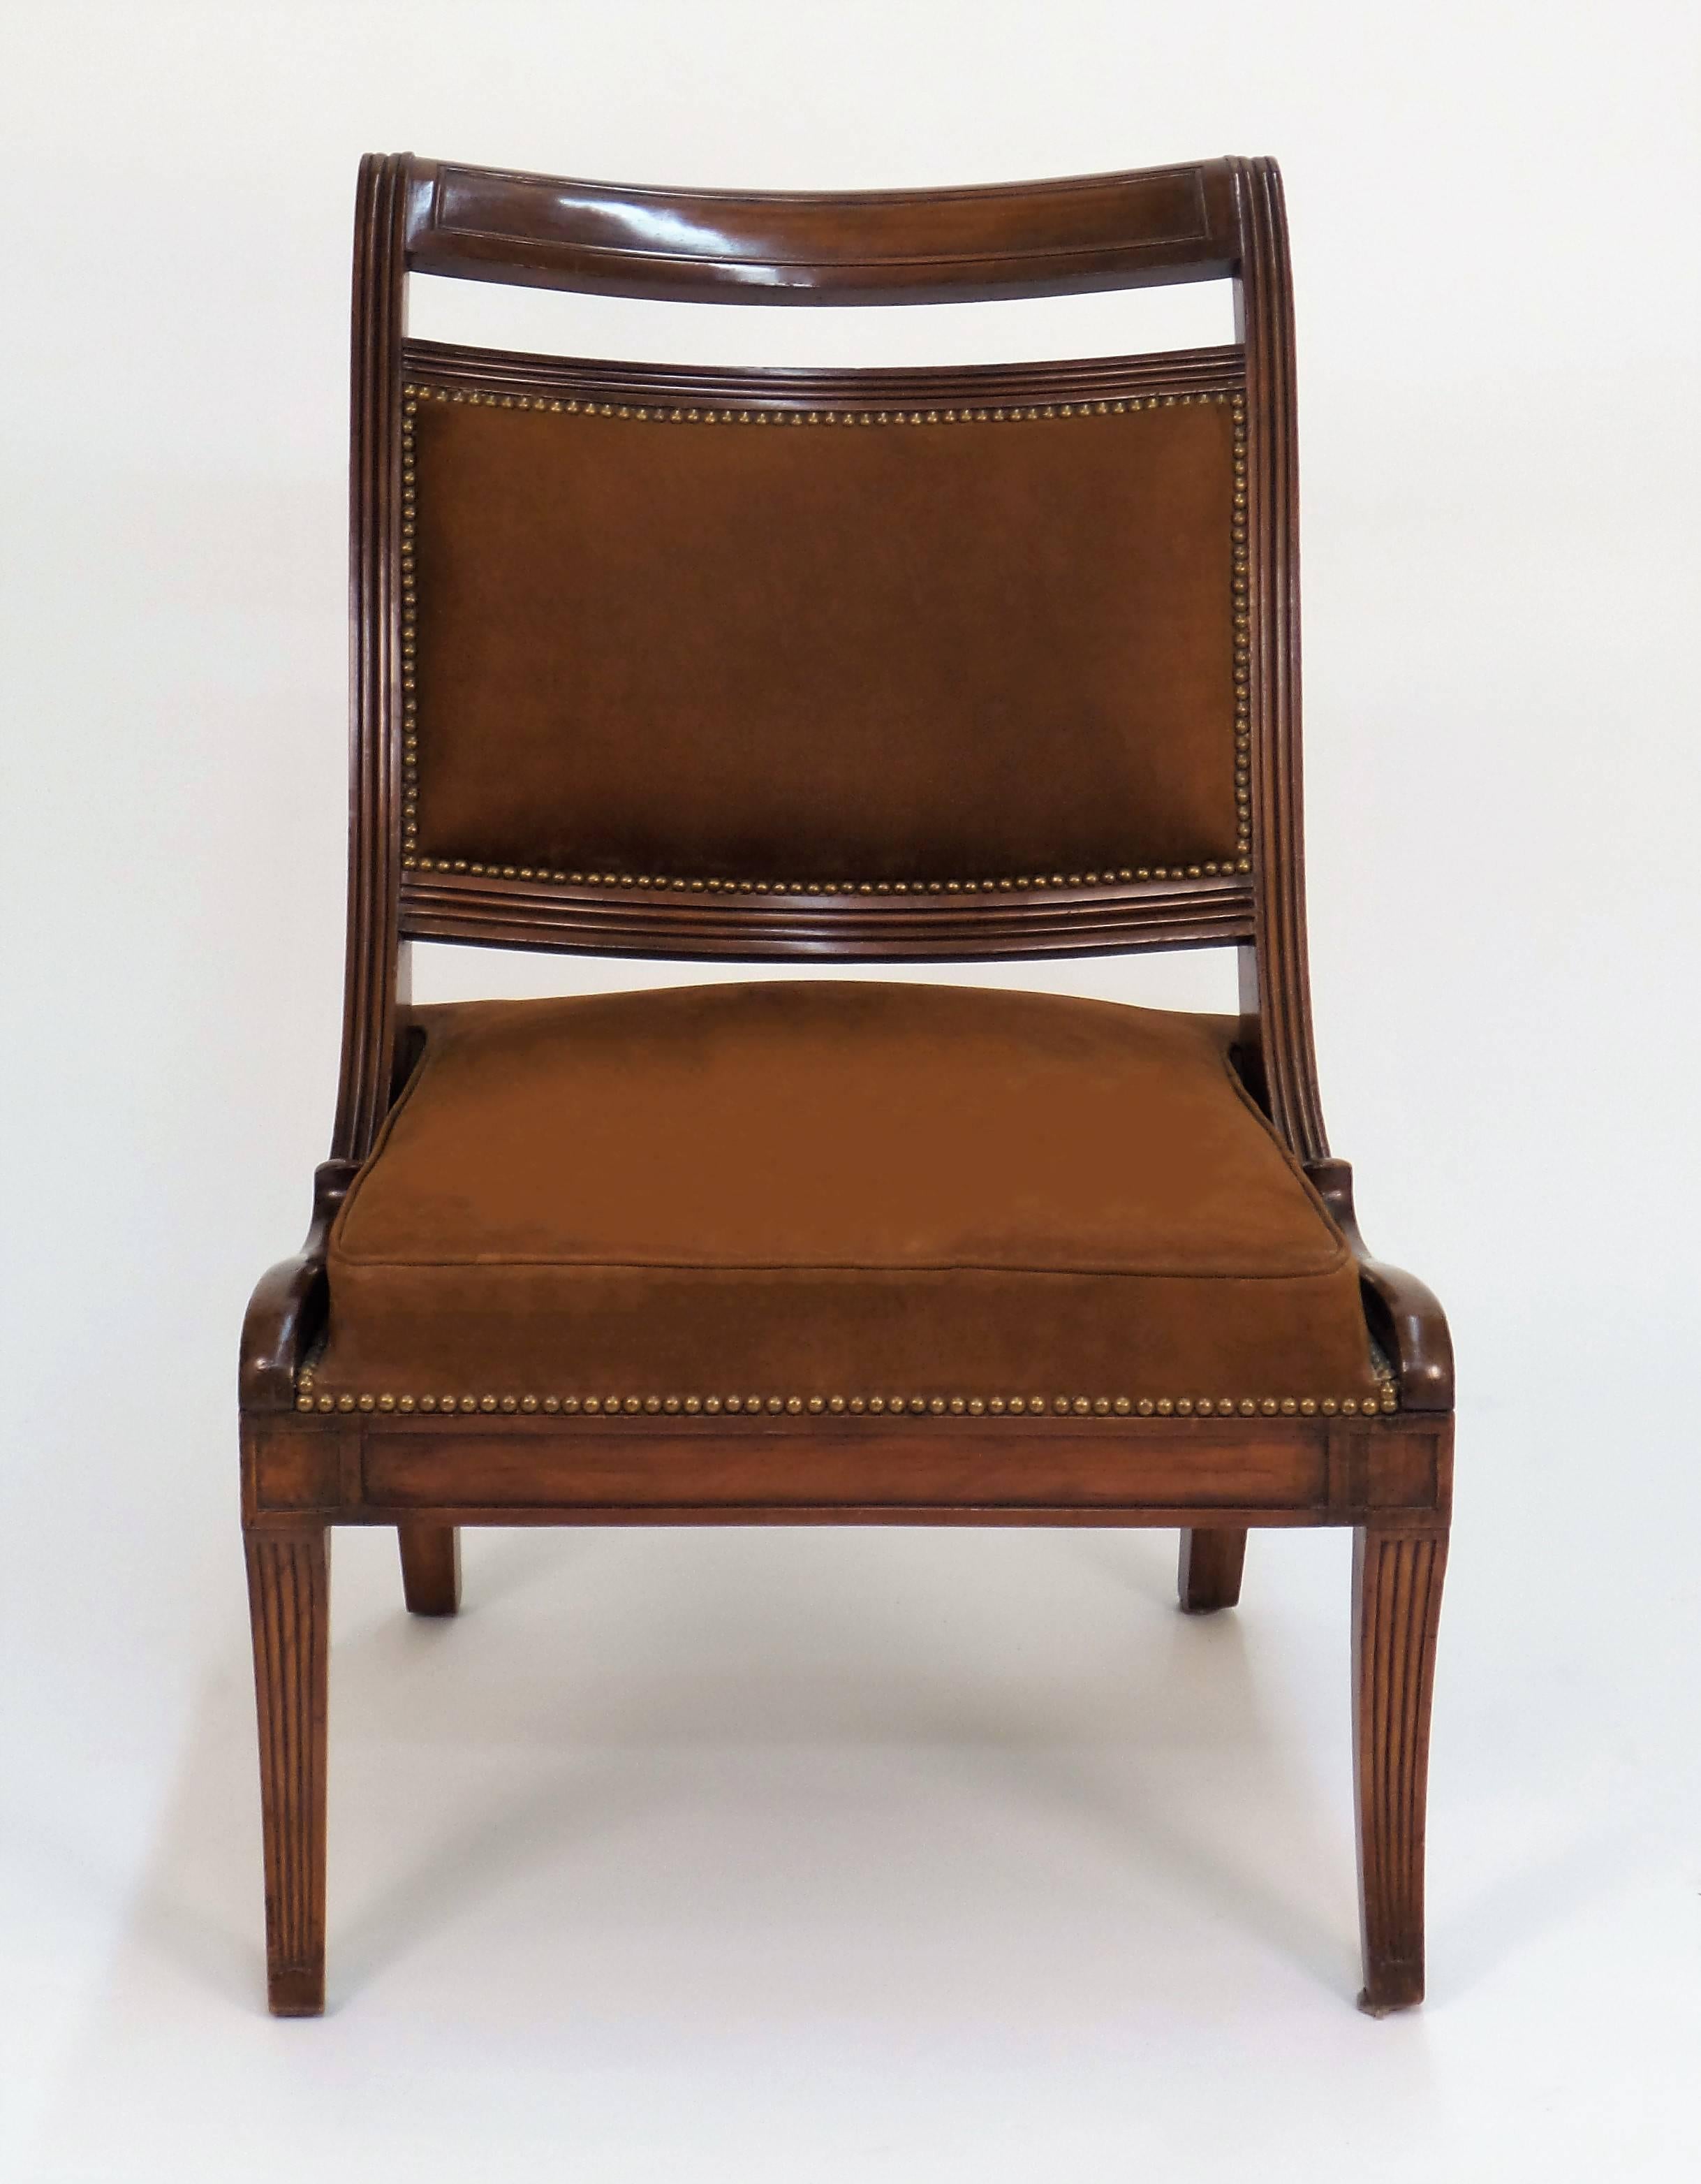 American Hope Revival Chair For Sale